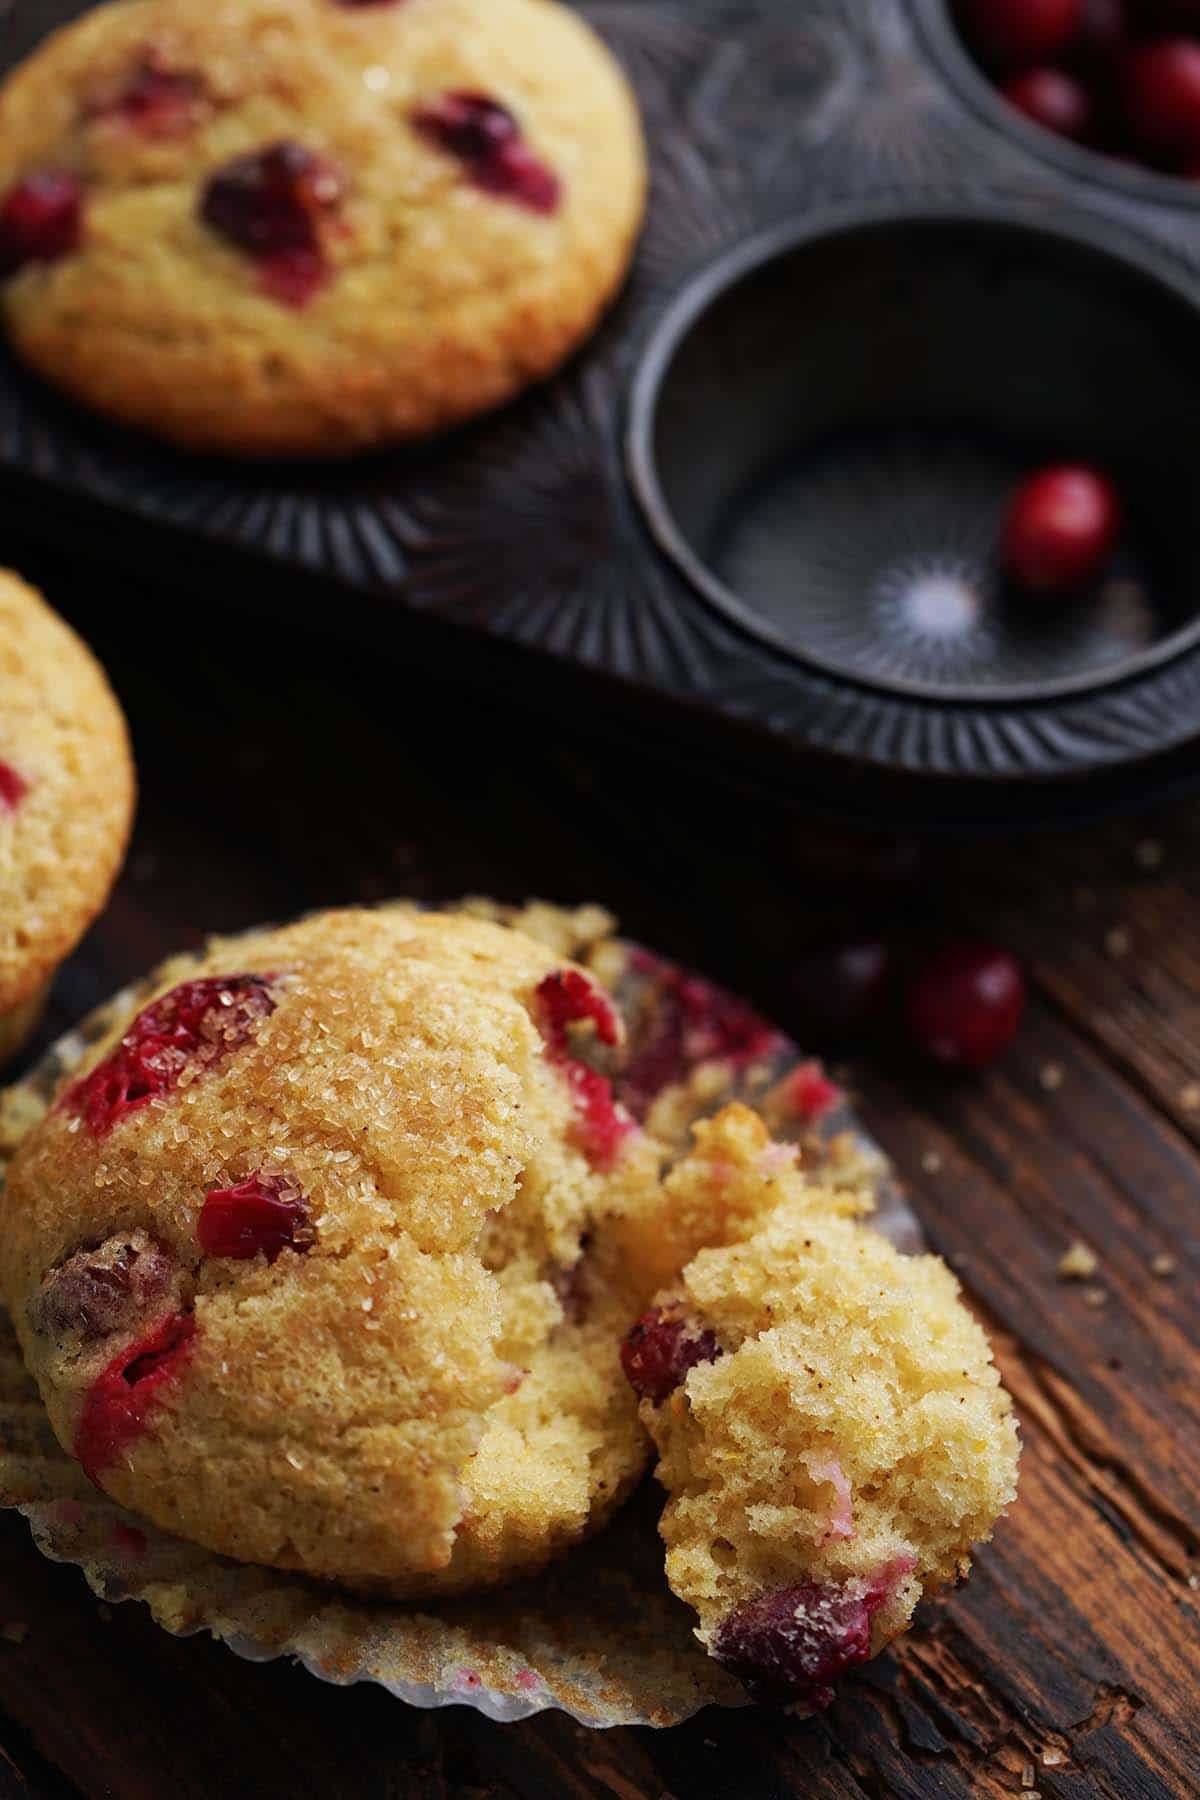 orange cranberry muffin showing fluffy inside